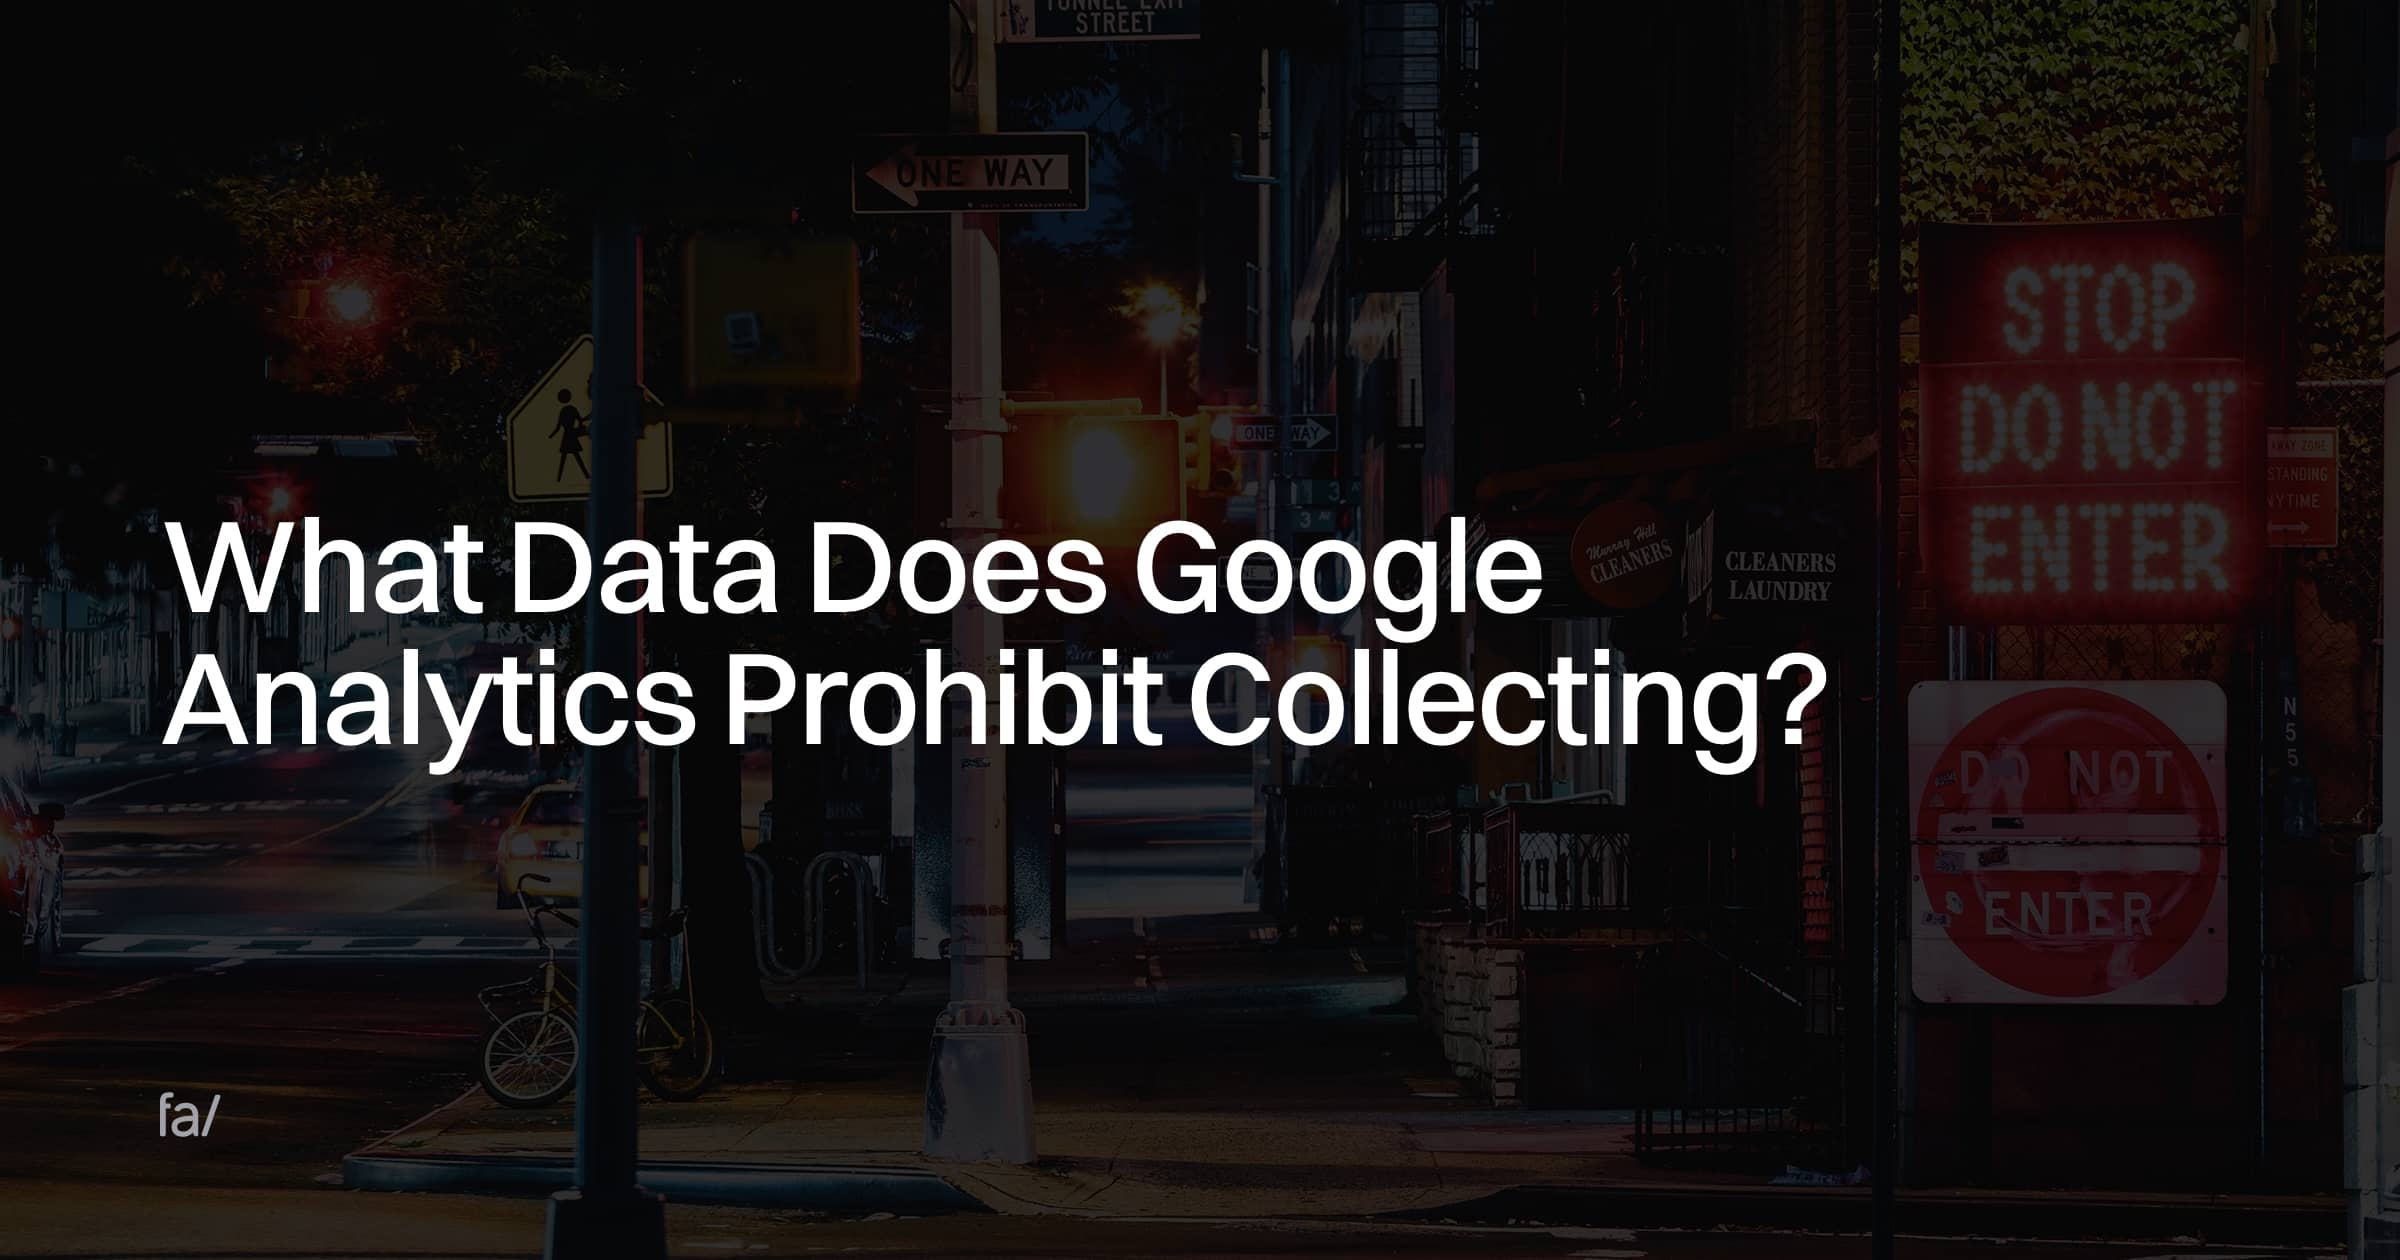 What Data Does Google Analytics Prohibit Collecting?